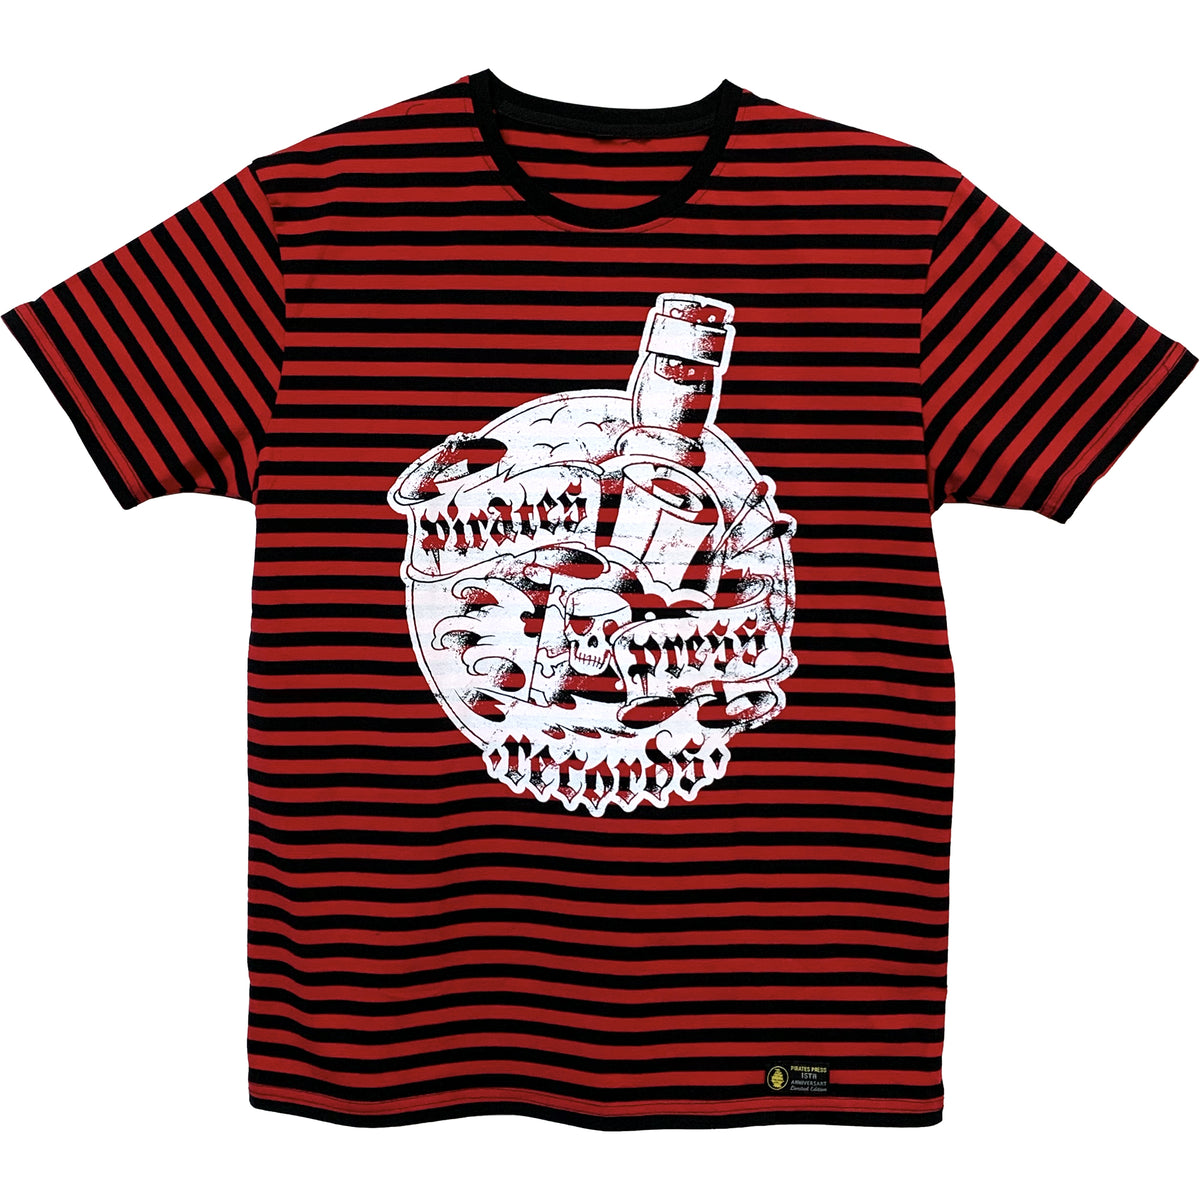 Pirates Press Records - Bottle - White on Red &amp; Black Striped  - 15 Year Tag - T-Shirt